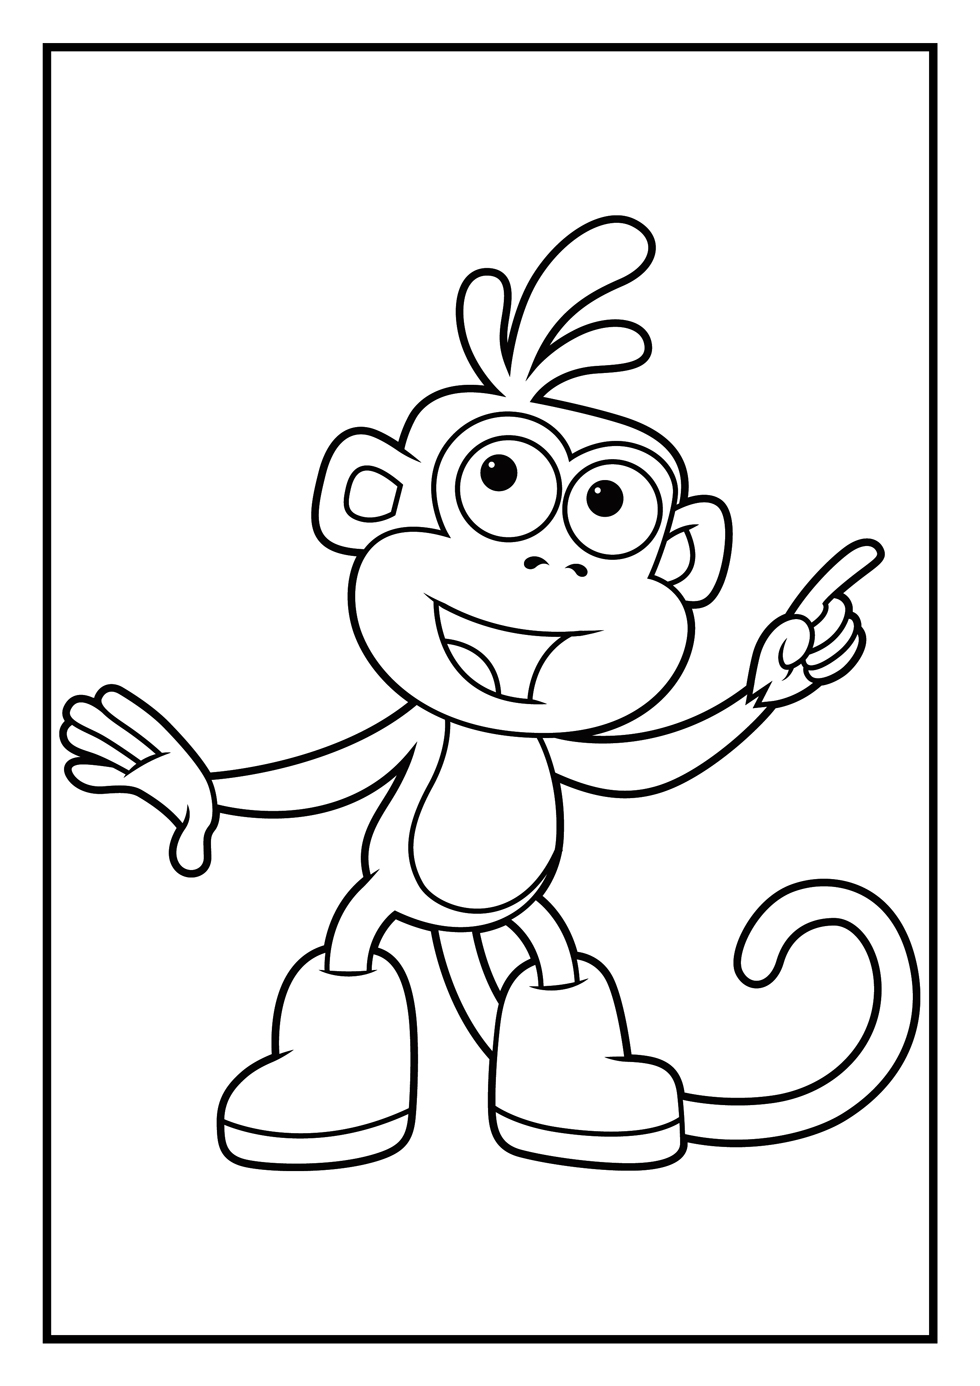 Dora And Boots Coloring Pages Printable - boringpop.com